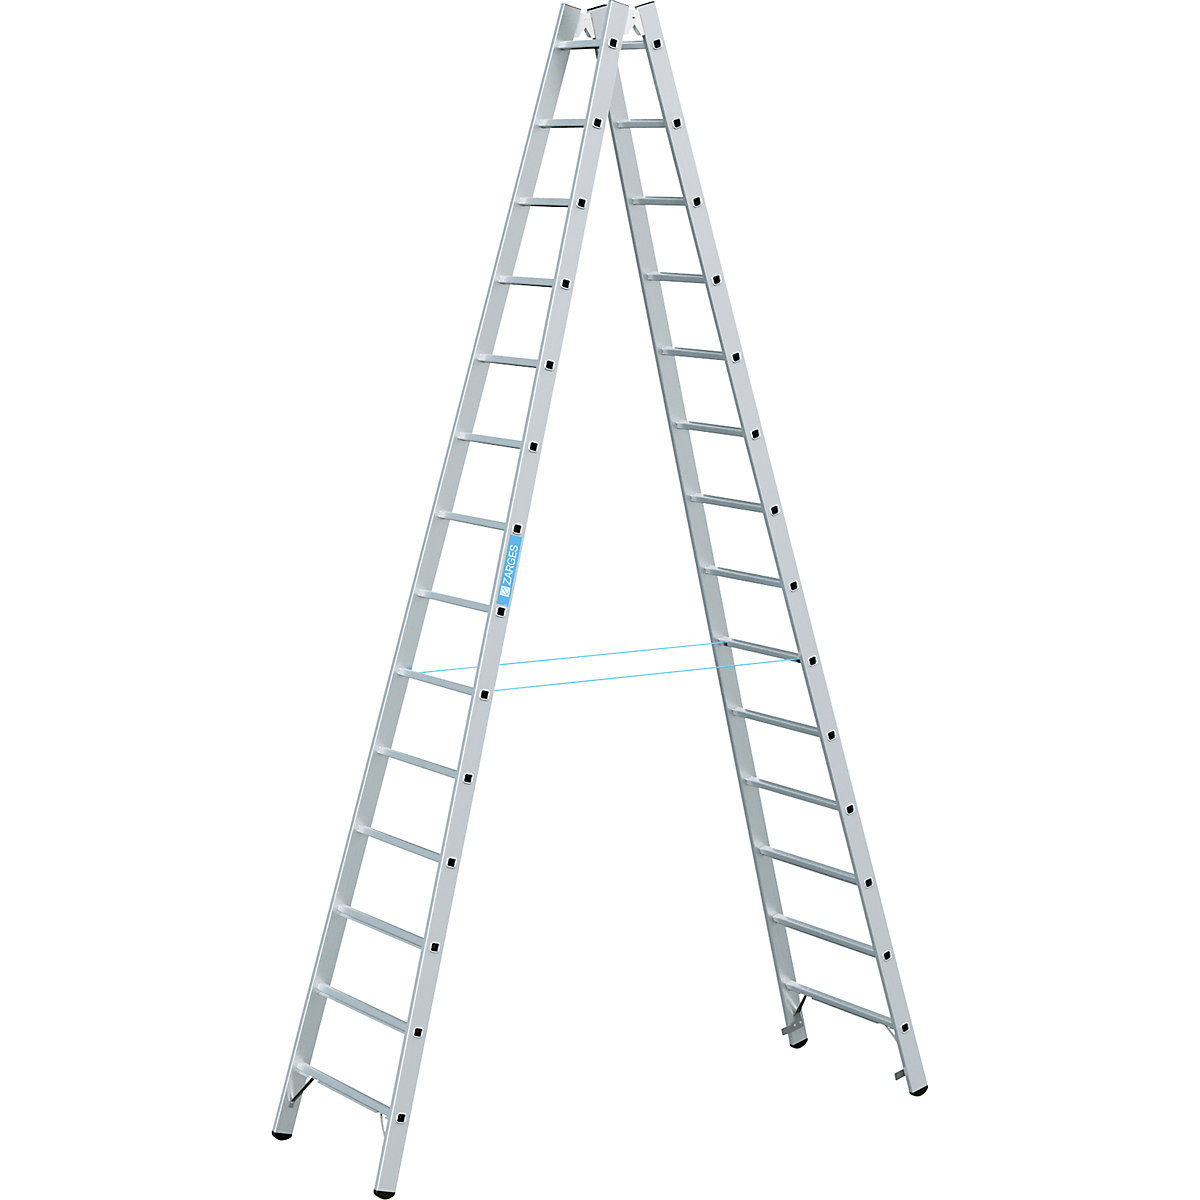 Professional rung ladder – ZARGES, double sided, 2 x 14 rungs-6